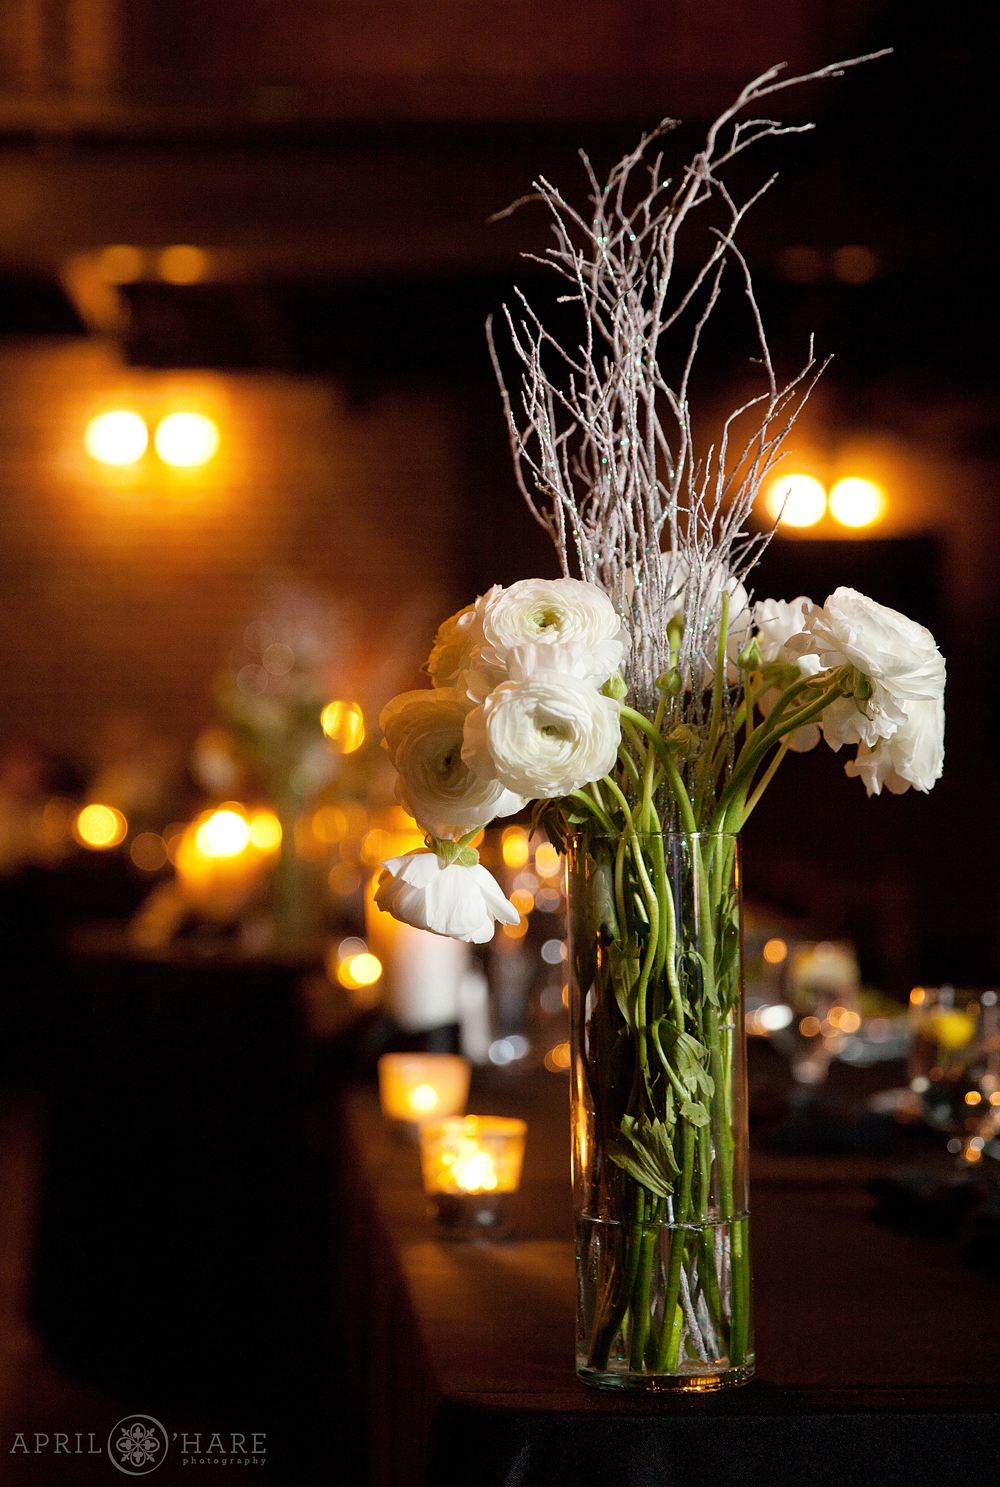 Colorado Industrial Wedding Venues with Modern Renovations done to Historic Warehouse Spaces